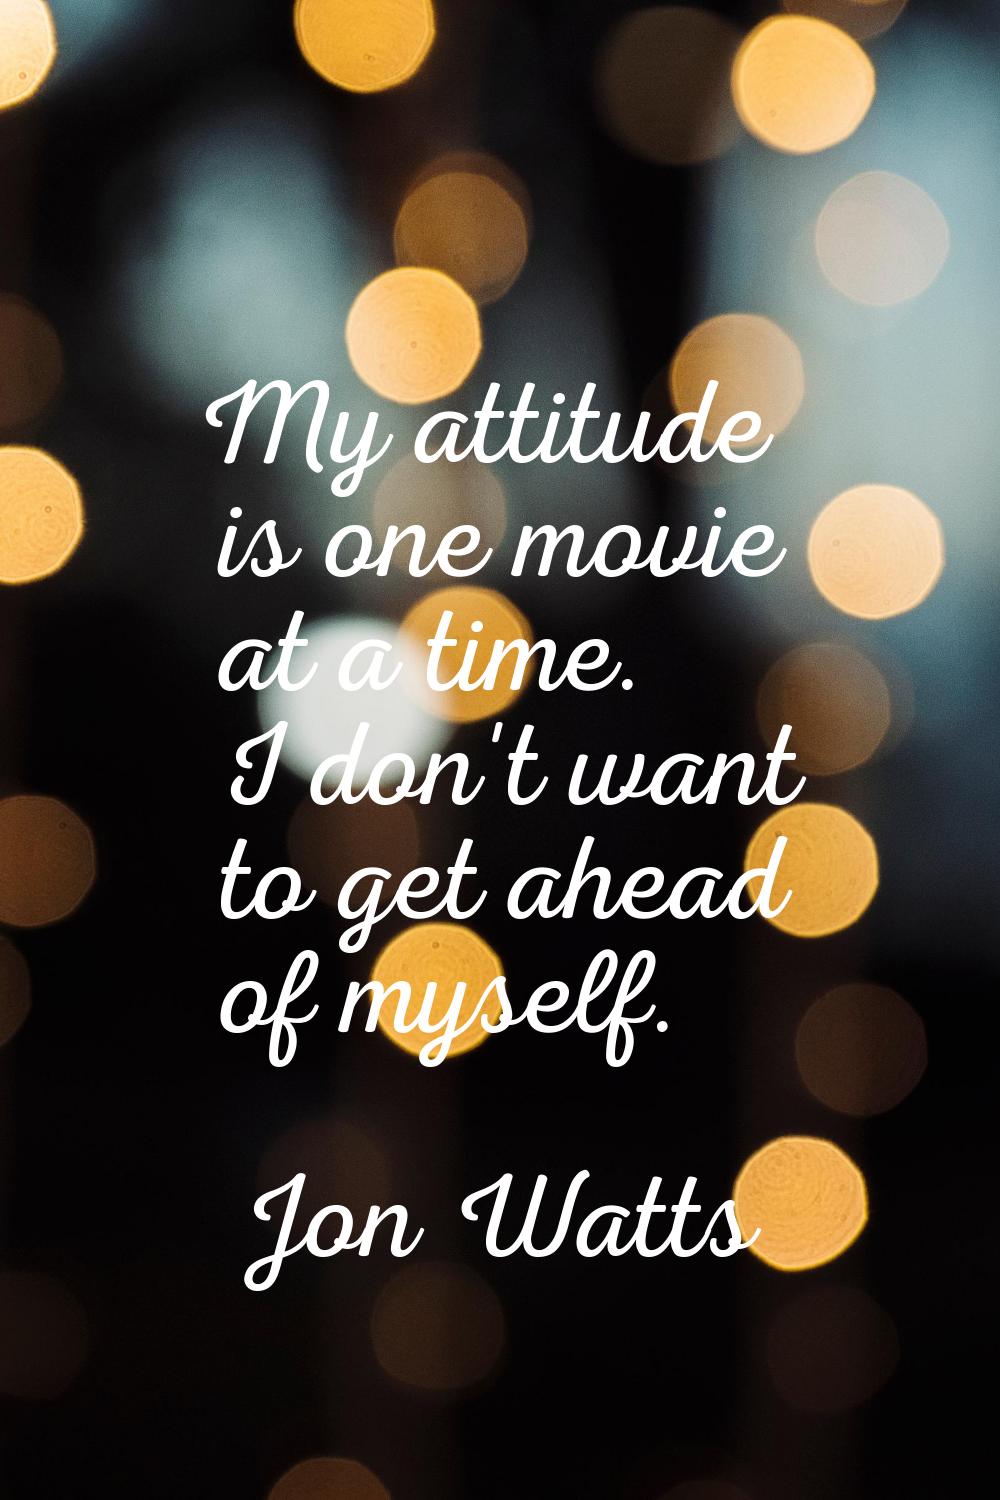 My attitude is one movie at a time. I don't want to get ahead of myself.